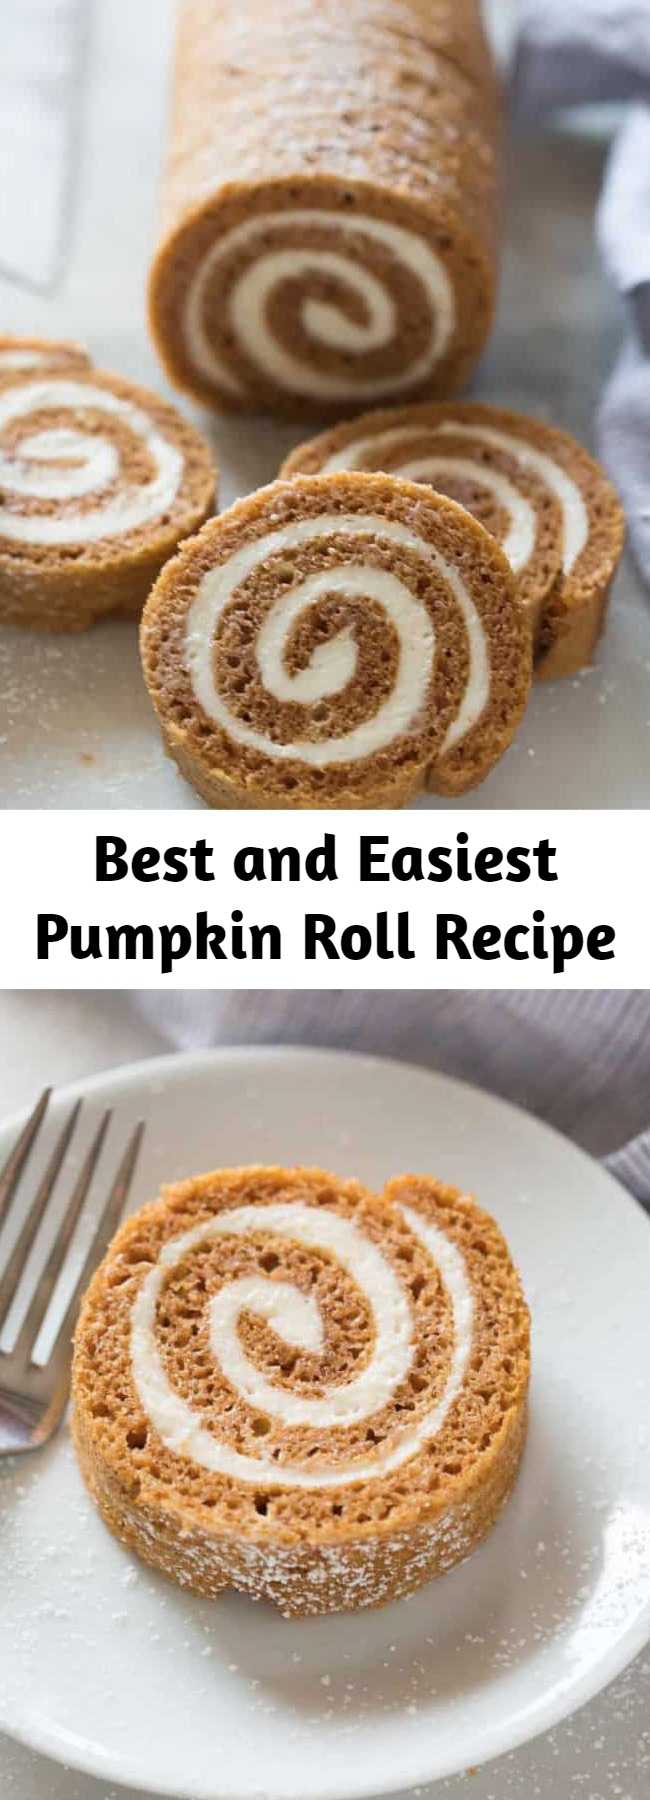 Best and Easiest Pumpkin Roll Recipe - I’ve got one simple trick that makes this classic Pumpkin Roll recipe EASY and mess-free! This classic pumpkin roll recipe is made with a delicious pumpkin cake, rolled up with a fluffy cream cheese filling. It has the best soft texture and flavor with a delicious cream cheese filling.  Always a crowd favorite, and easier than ever to make!